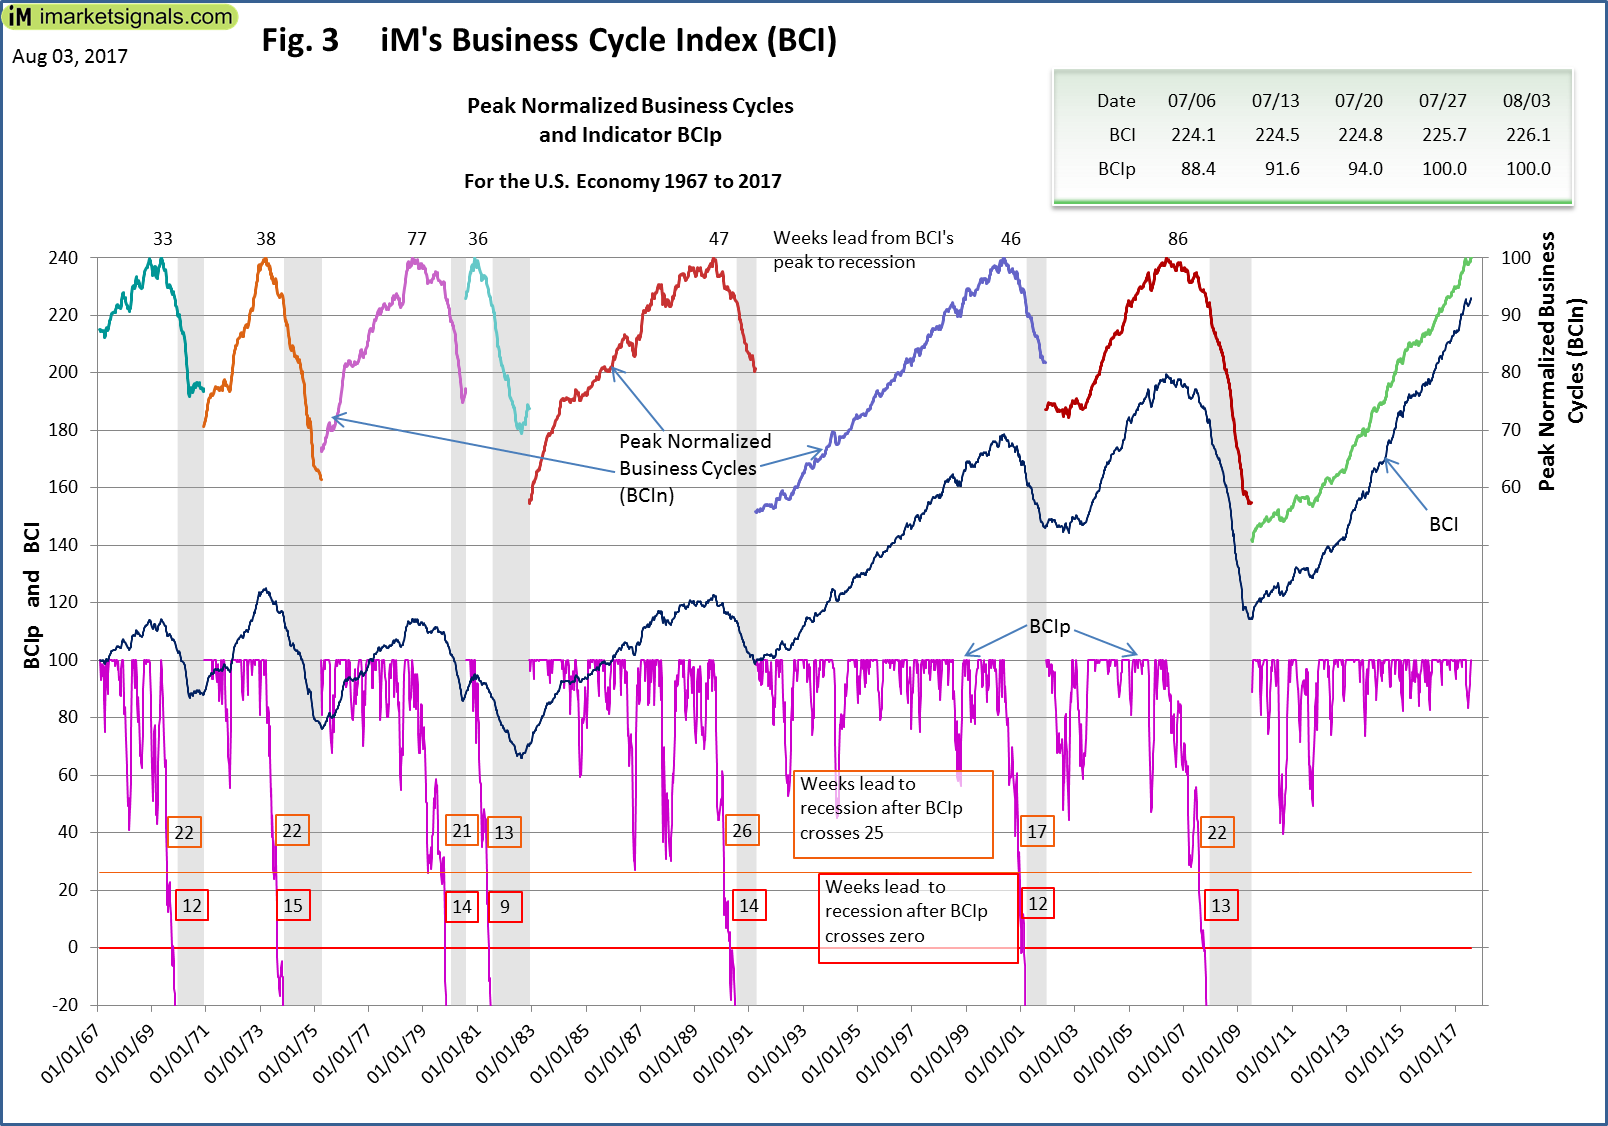 Fig 3 :iM's Business Cycle Index: Peak Business Cycles and BCIp